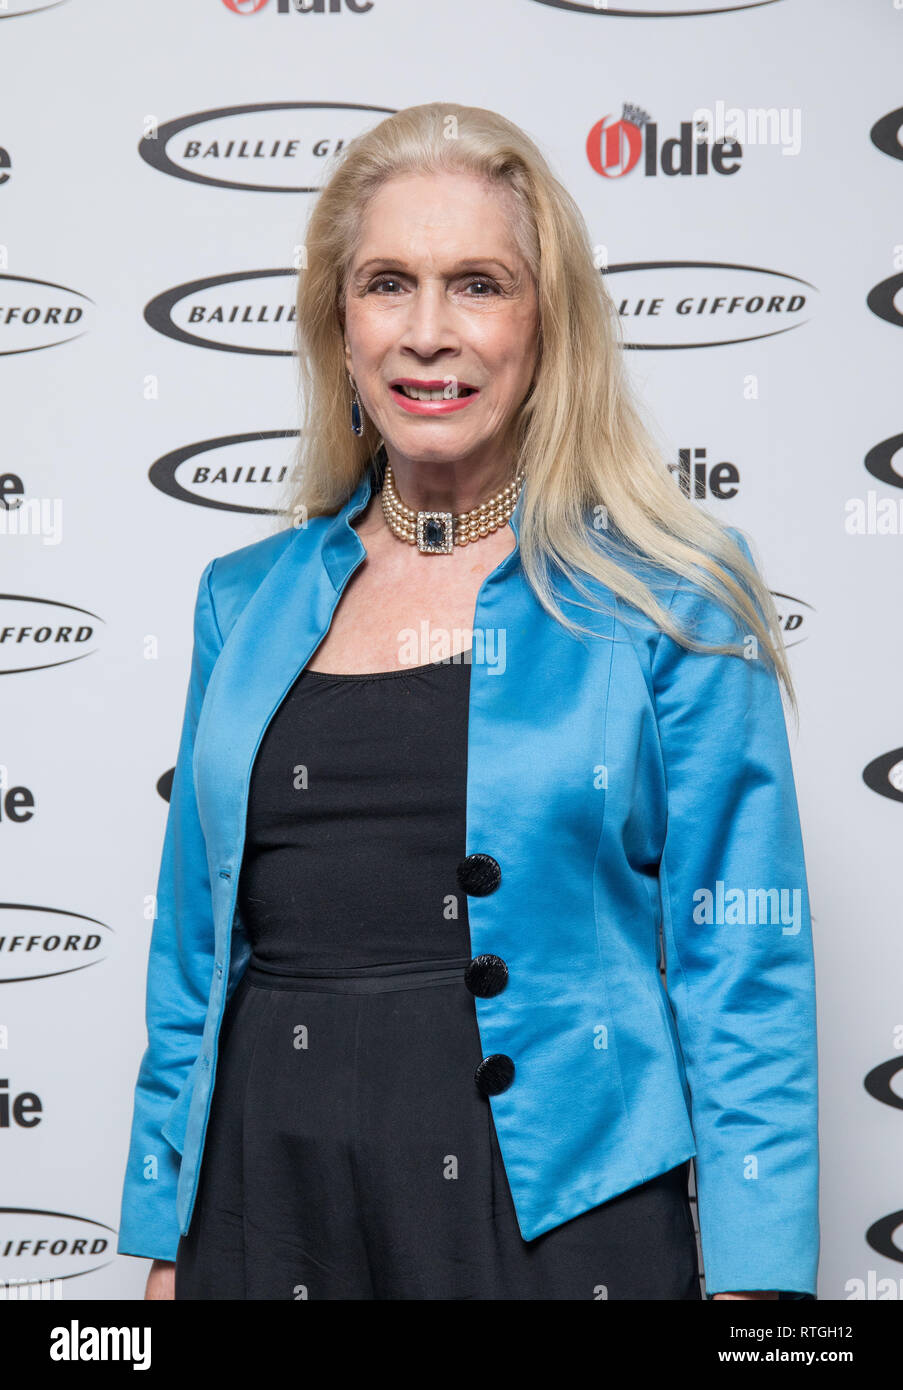 Celebs attend The Oldie of the Year Awards 2019  Featuring: Lady Colin Campbell Where: London, United Kingdom When: 29 Jan 2019 Credit: Phil Lewis/WENN.com Stock Photo